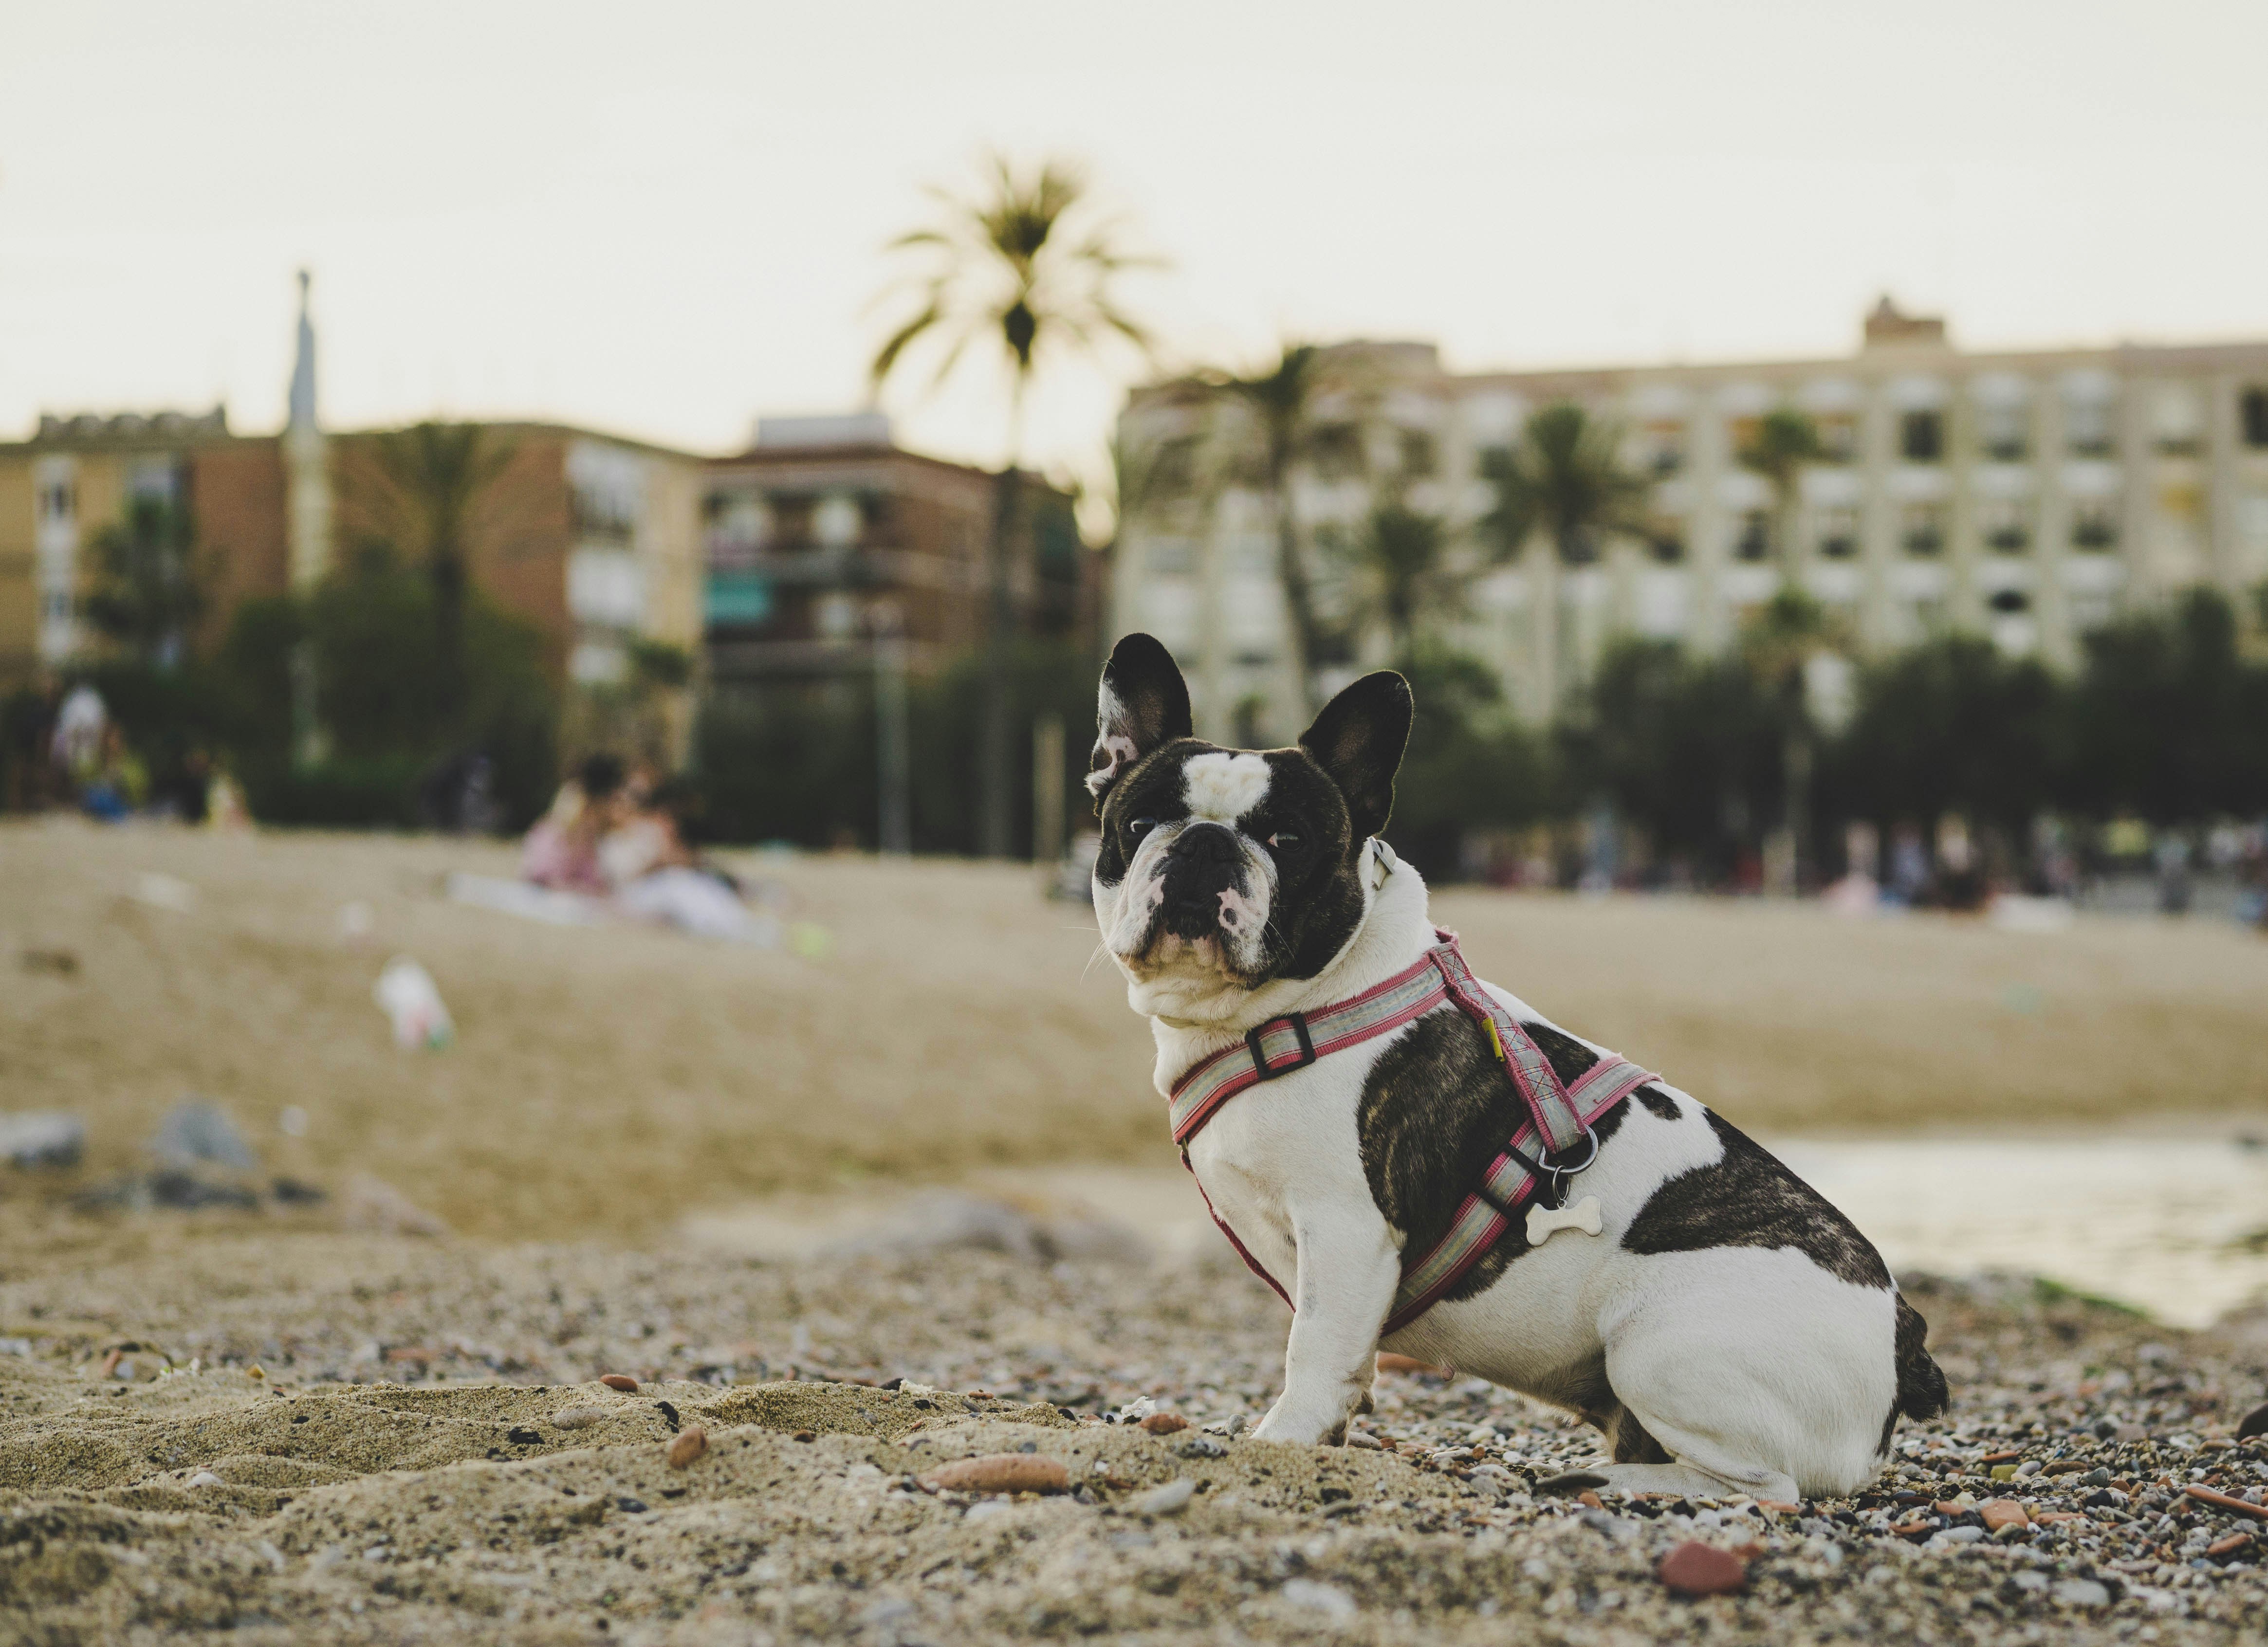 Man's best friend is something to behold in all forms: gorgeous Golden Retrievers, tiny yapping chihuahuas, fearsome pitbulls. Unsplash's community of incredible photographers has helped us curate an amazing selection of dog images that you can access and use free of charge.